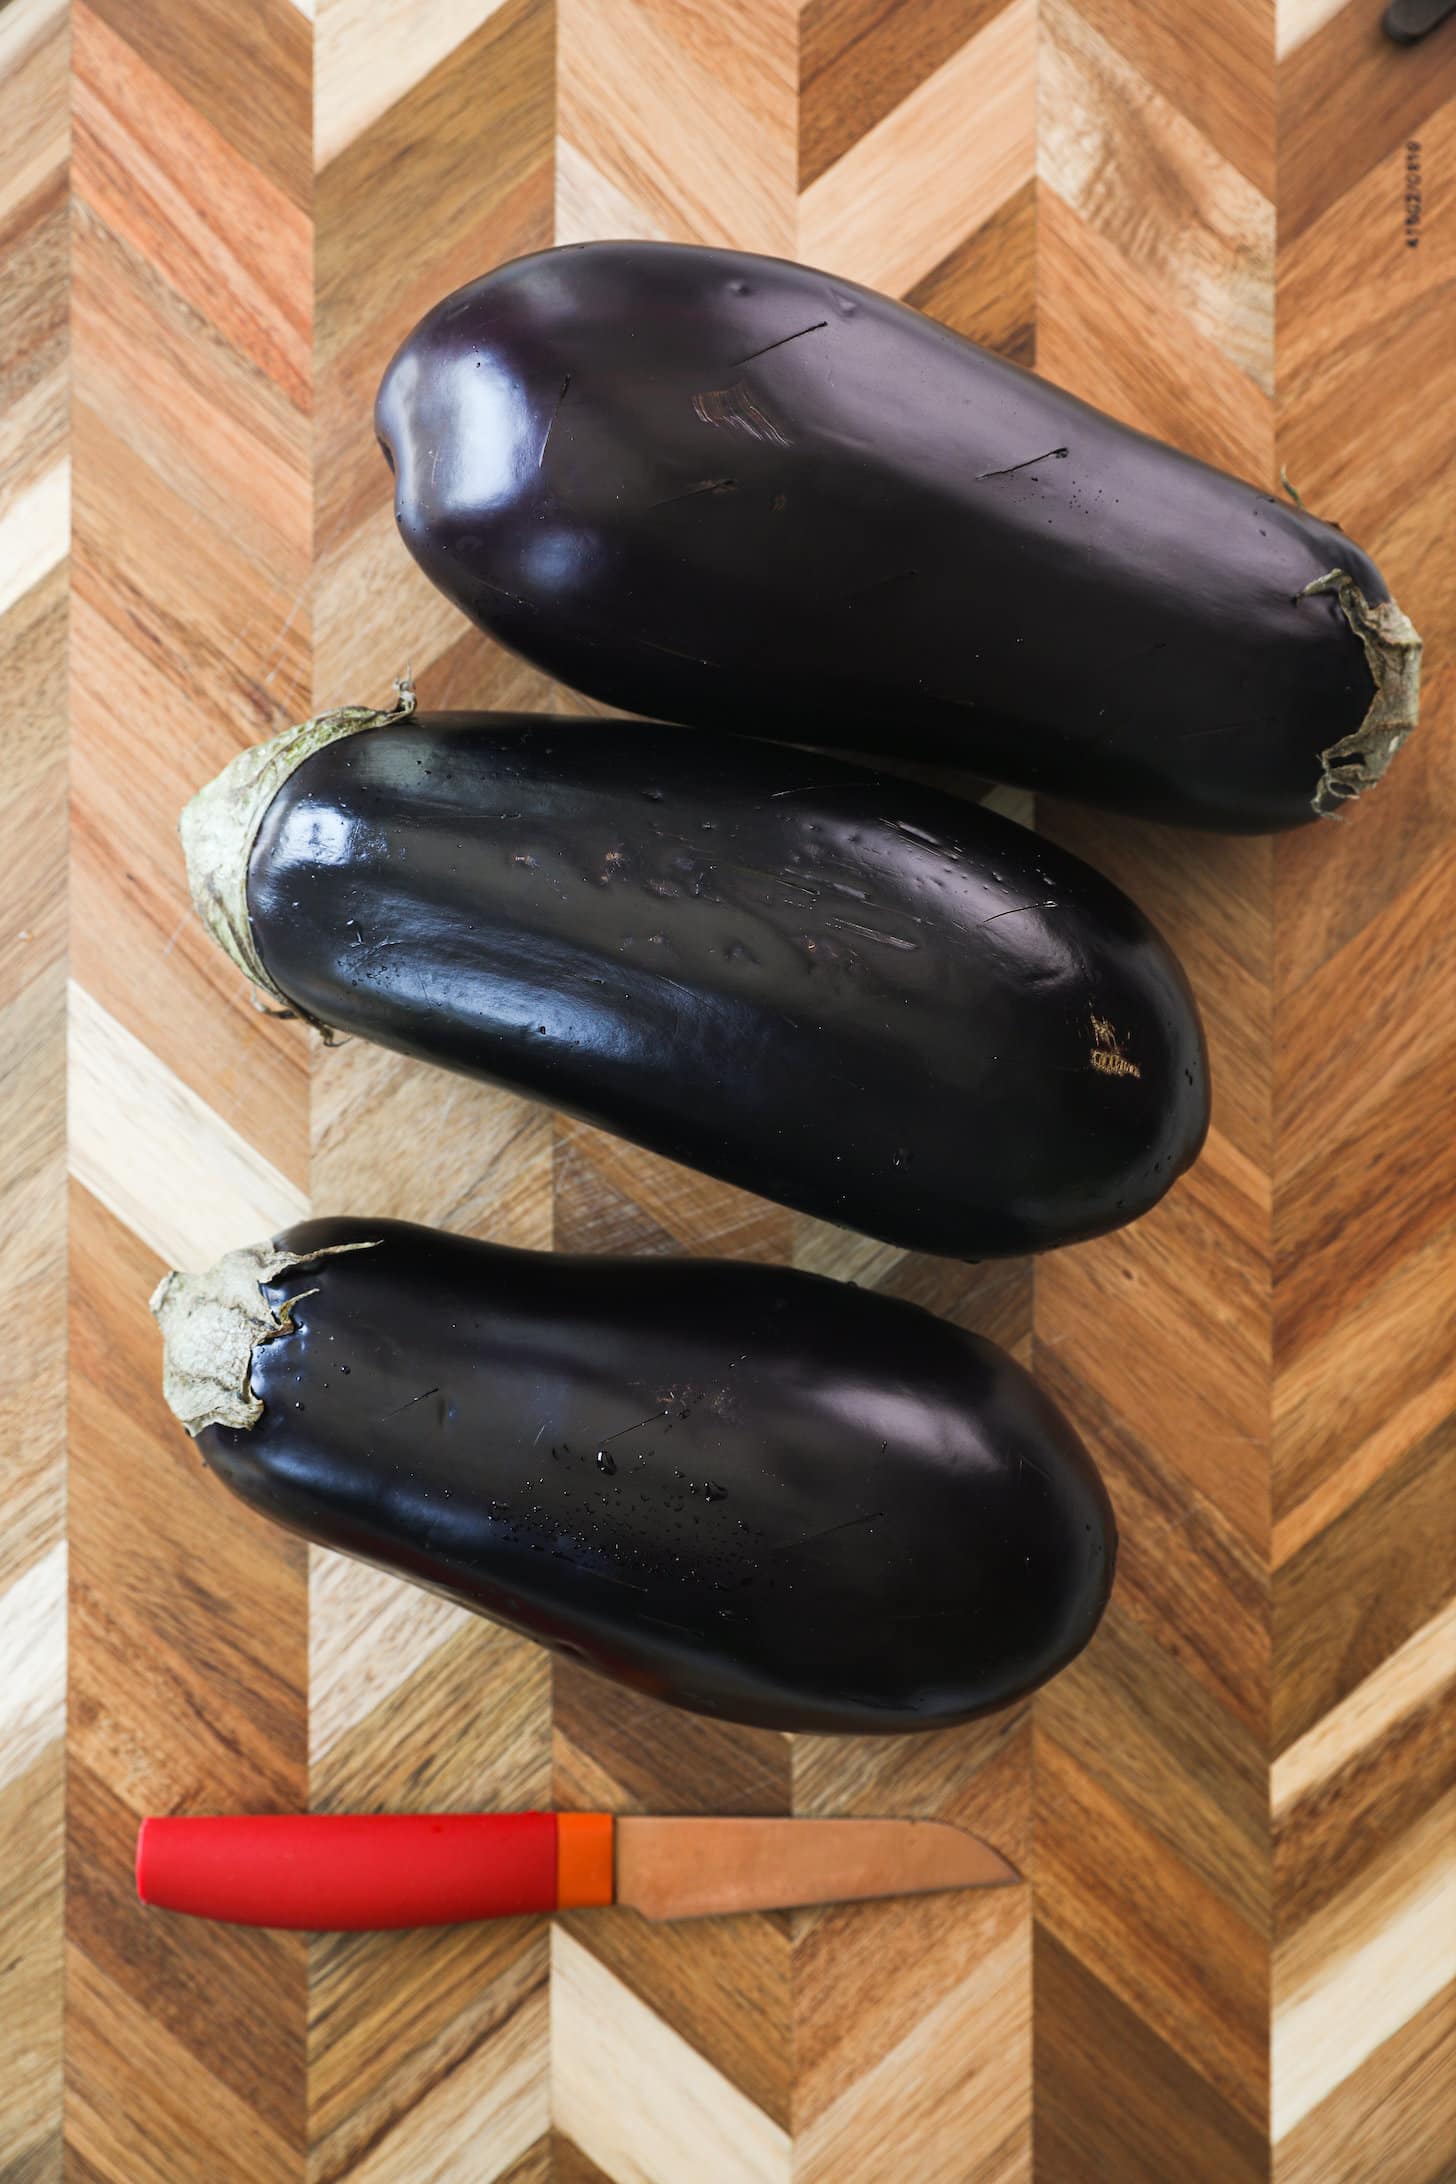 Three globe eggplants on a wooden board with a red knife next to them.